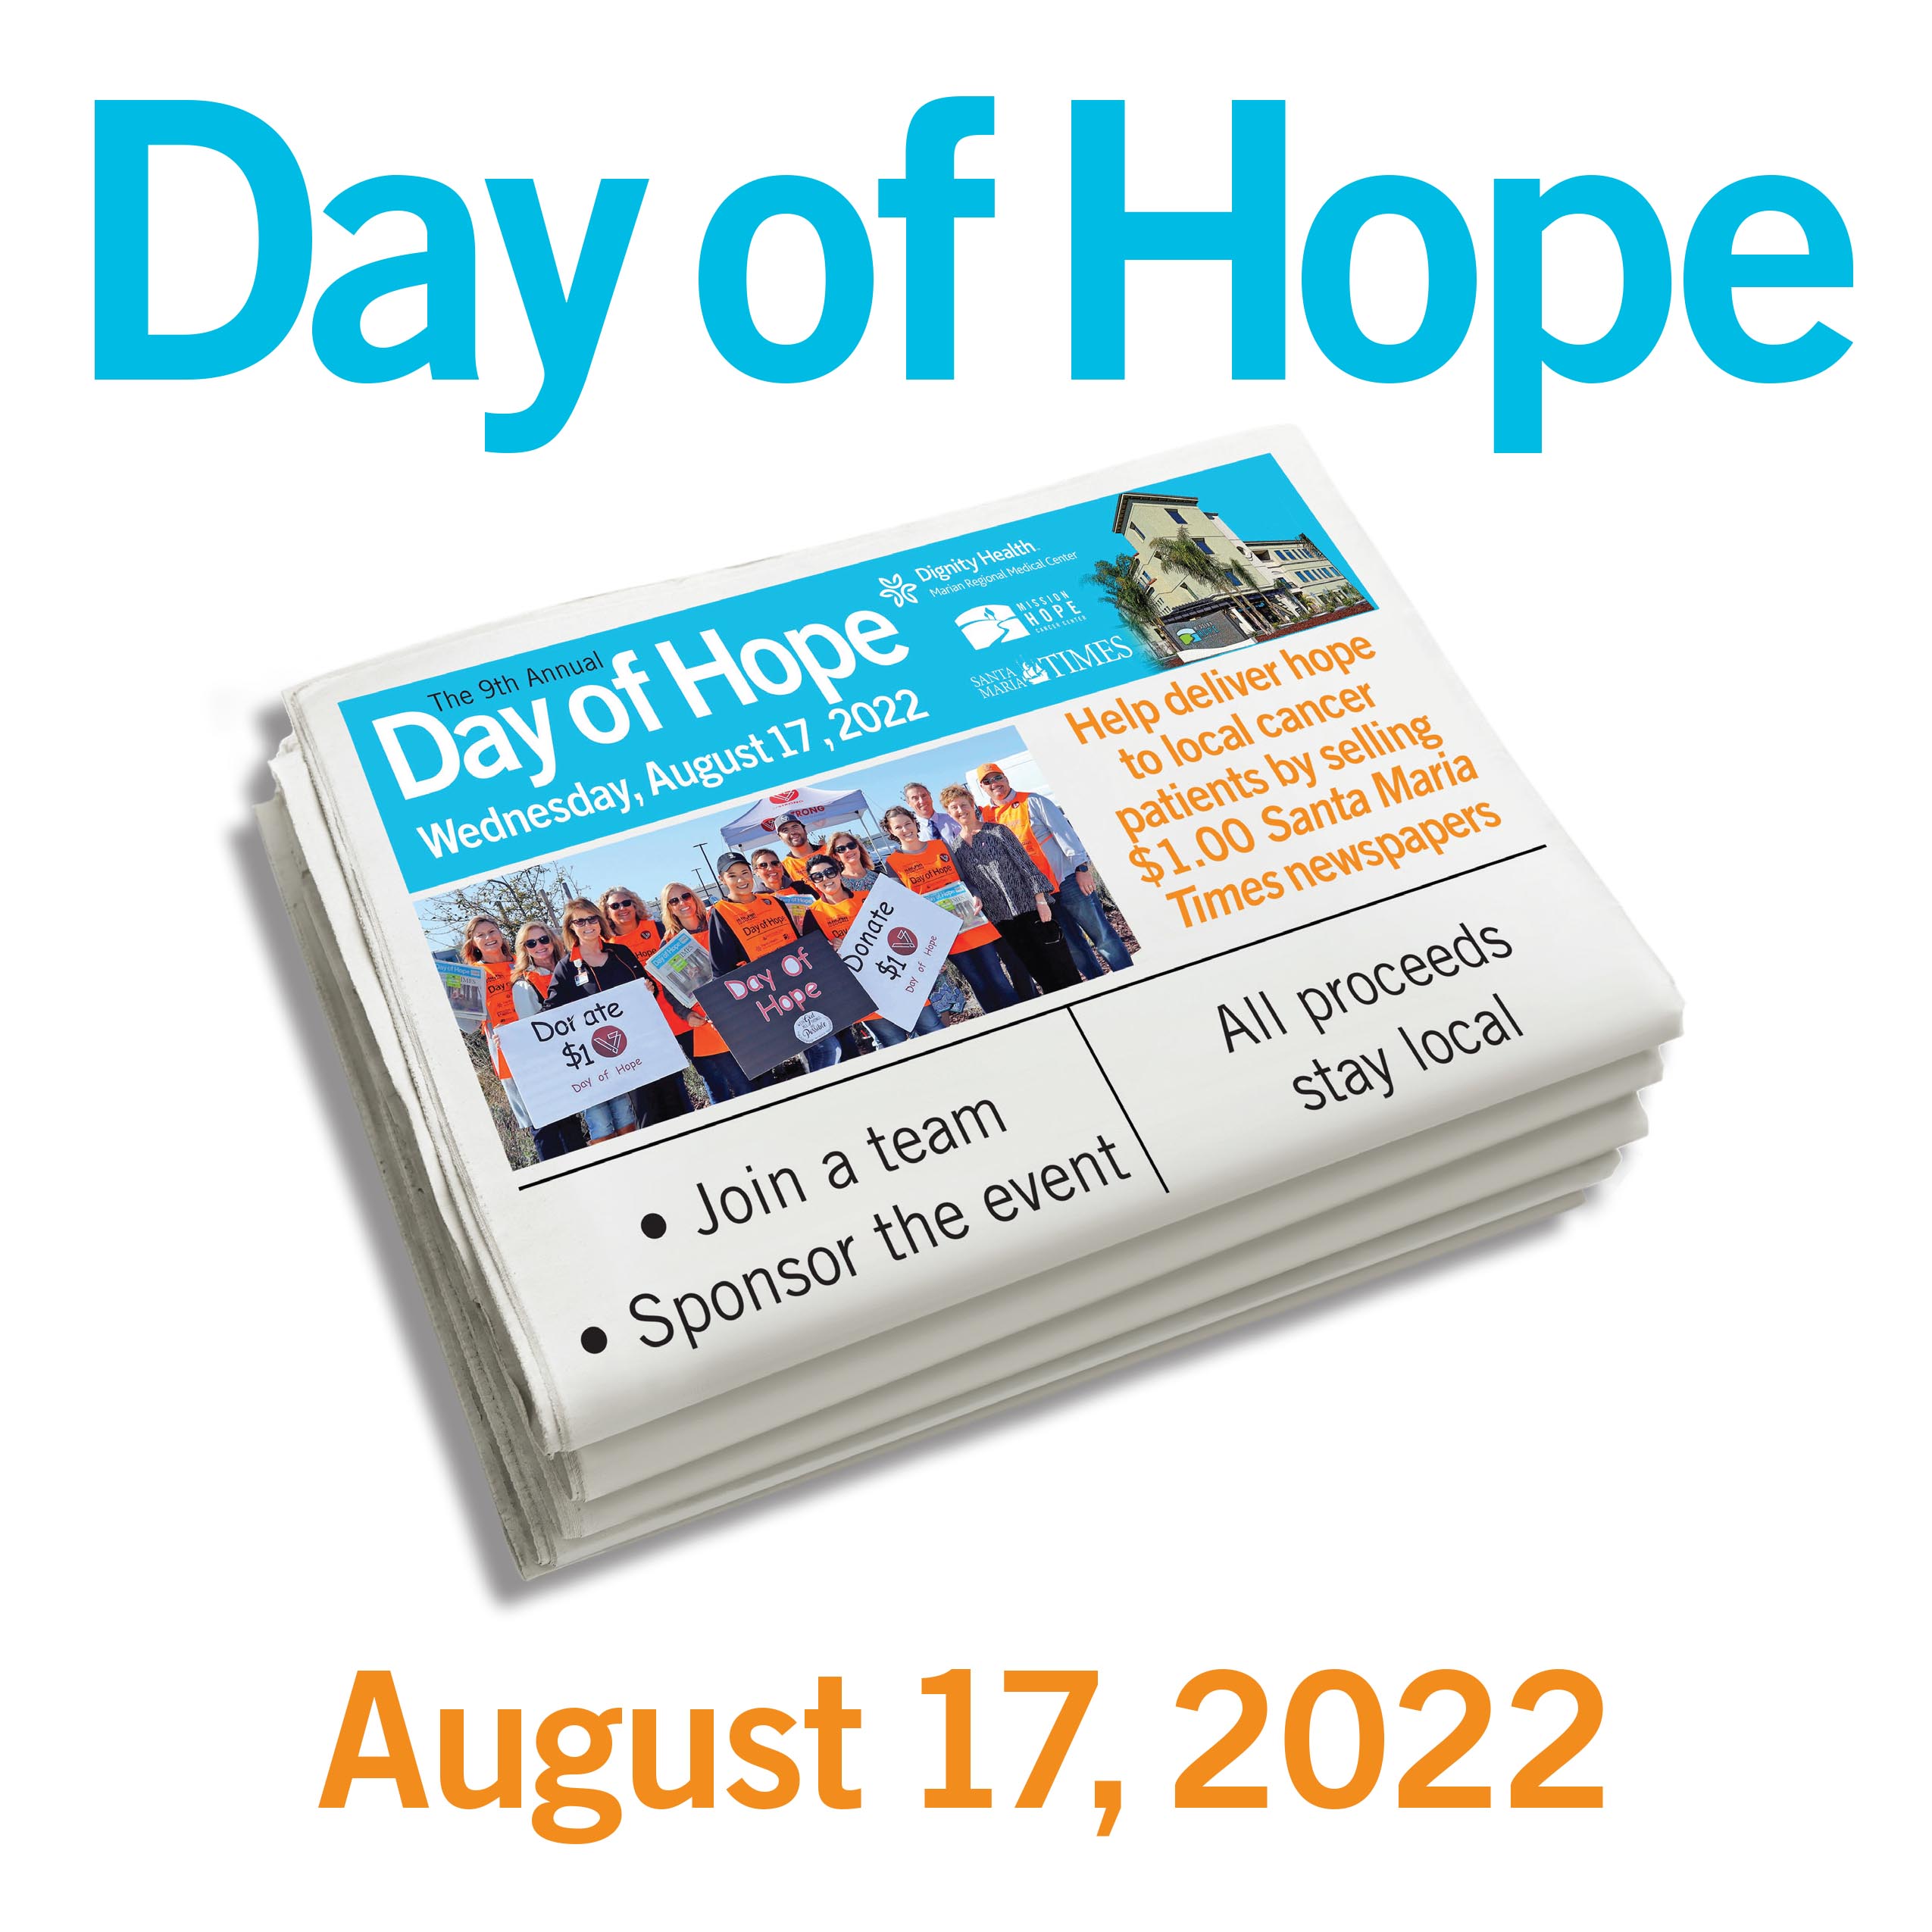 Day of Hope Date